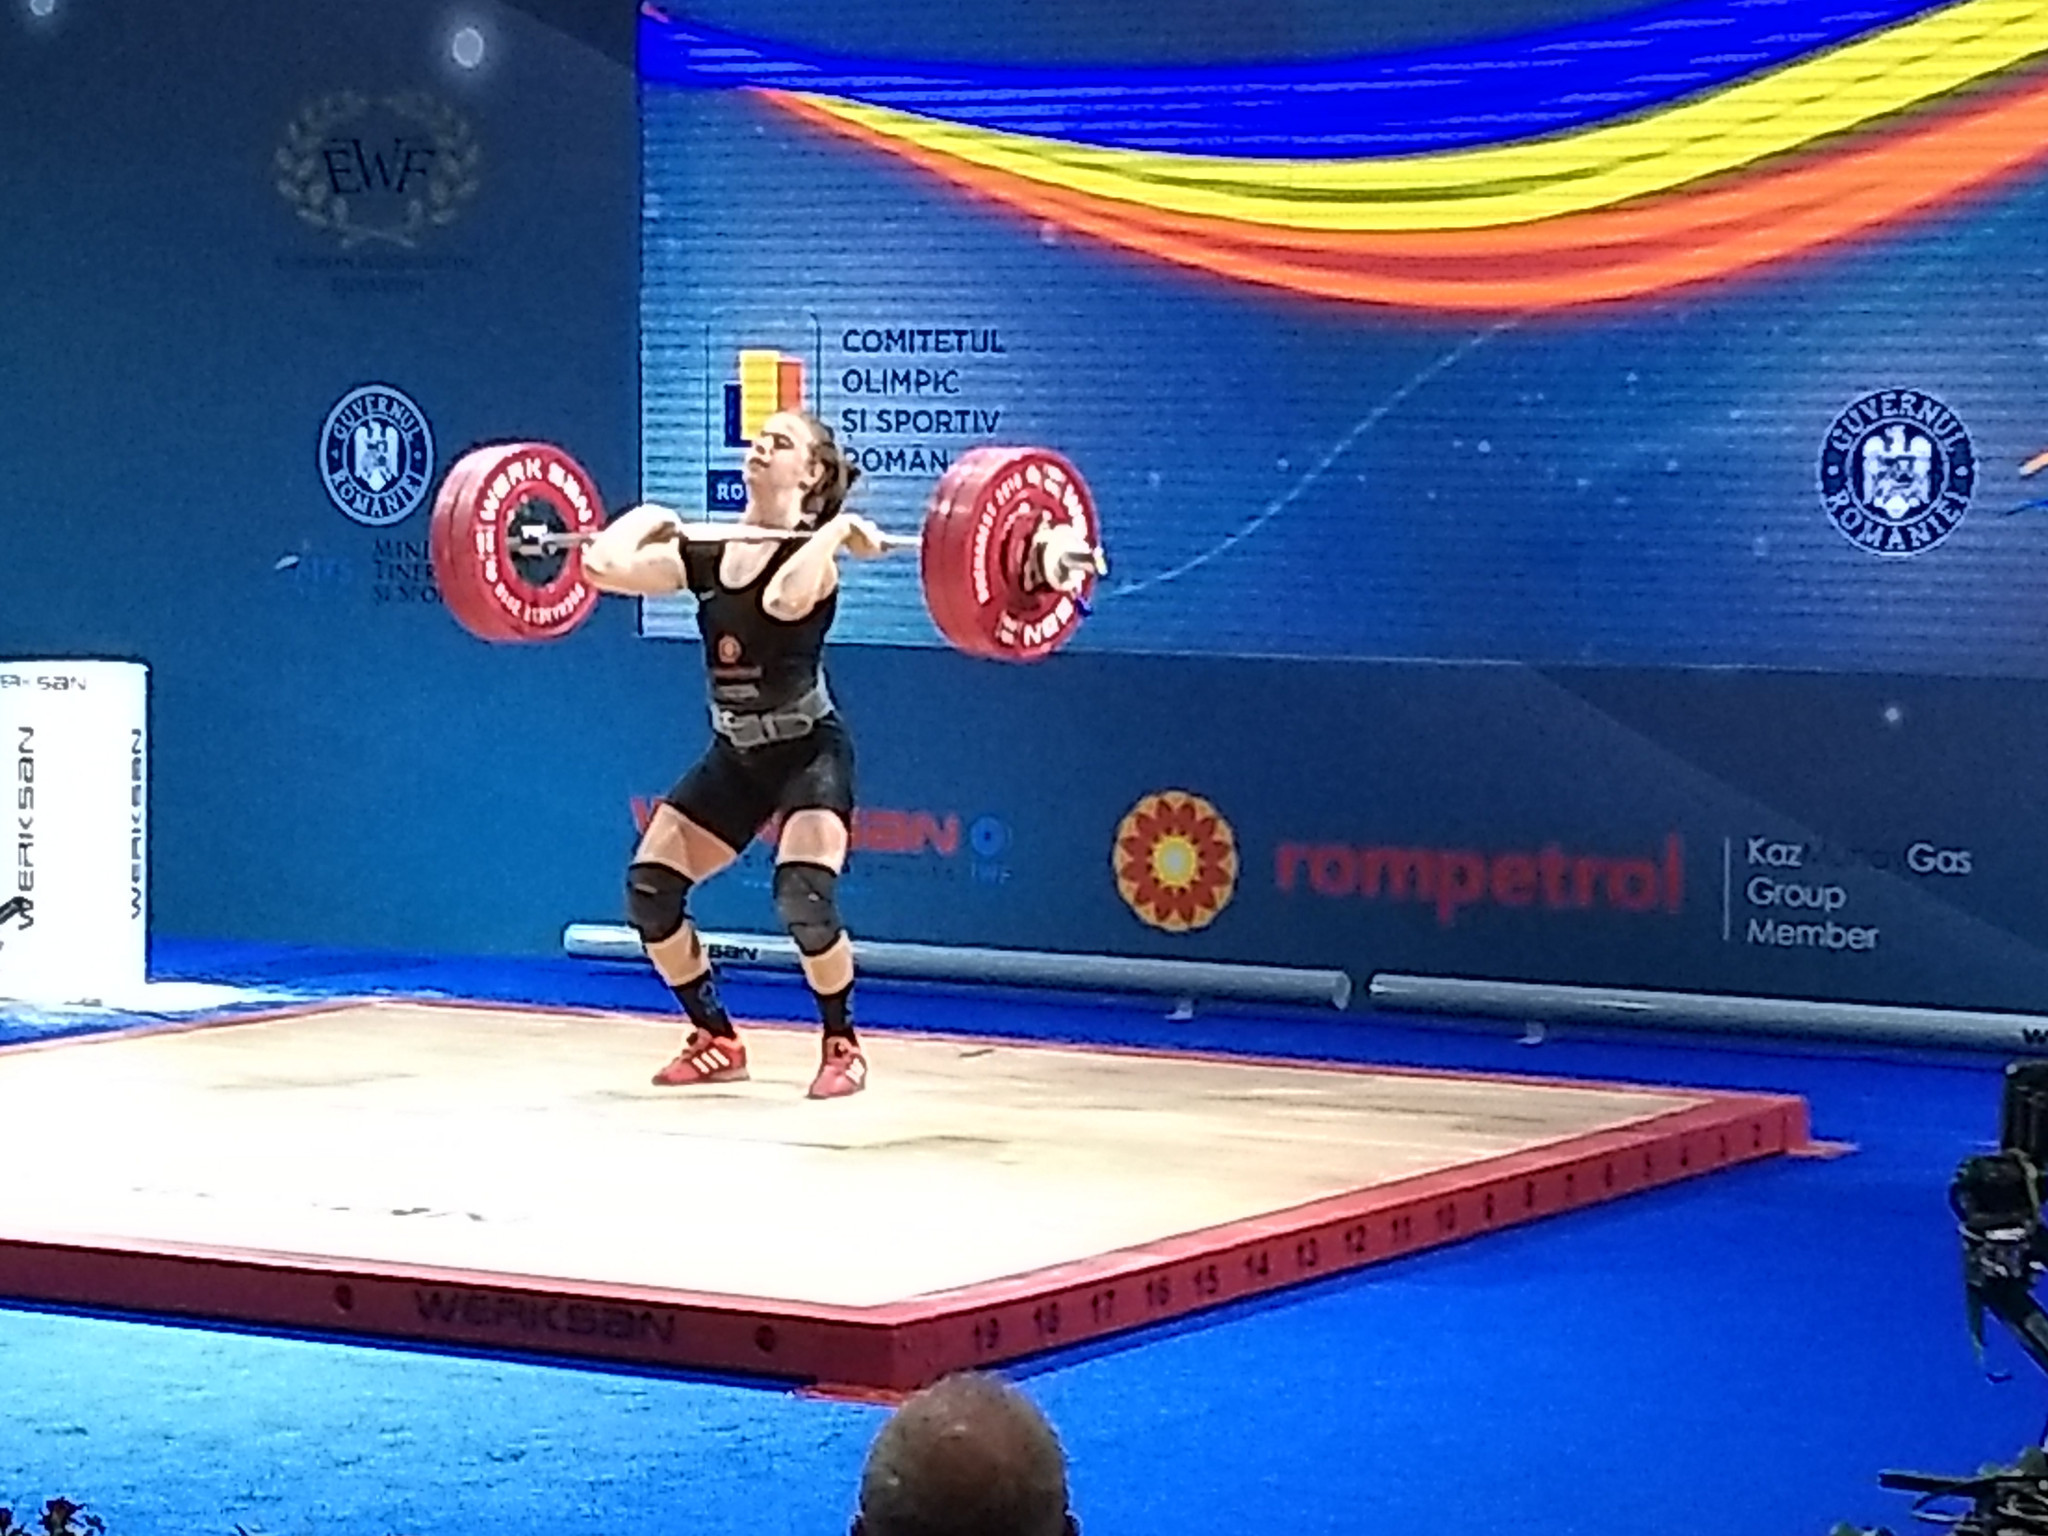 Olympic heroes Szabo and Damian lend support as Romania sets weightlifting record - as fastest hosts